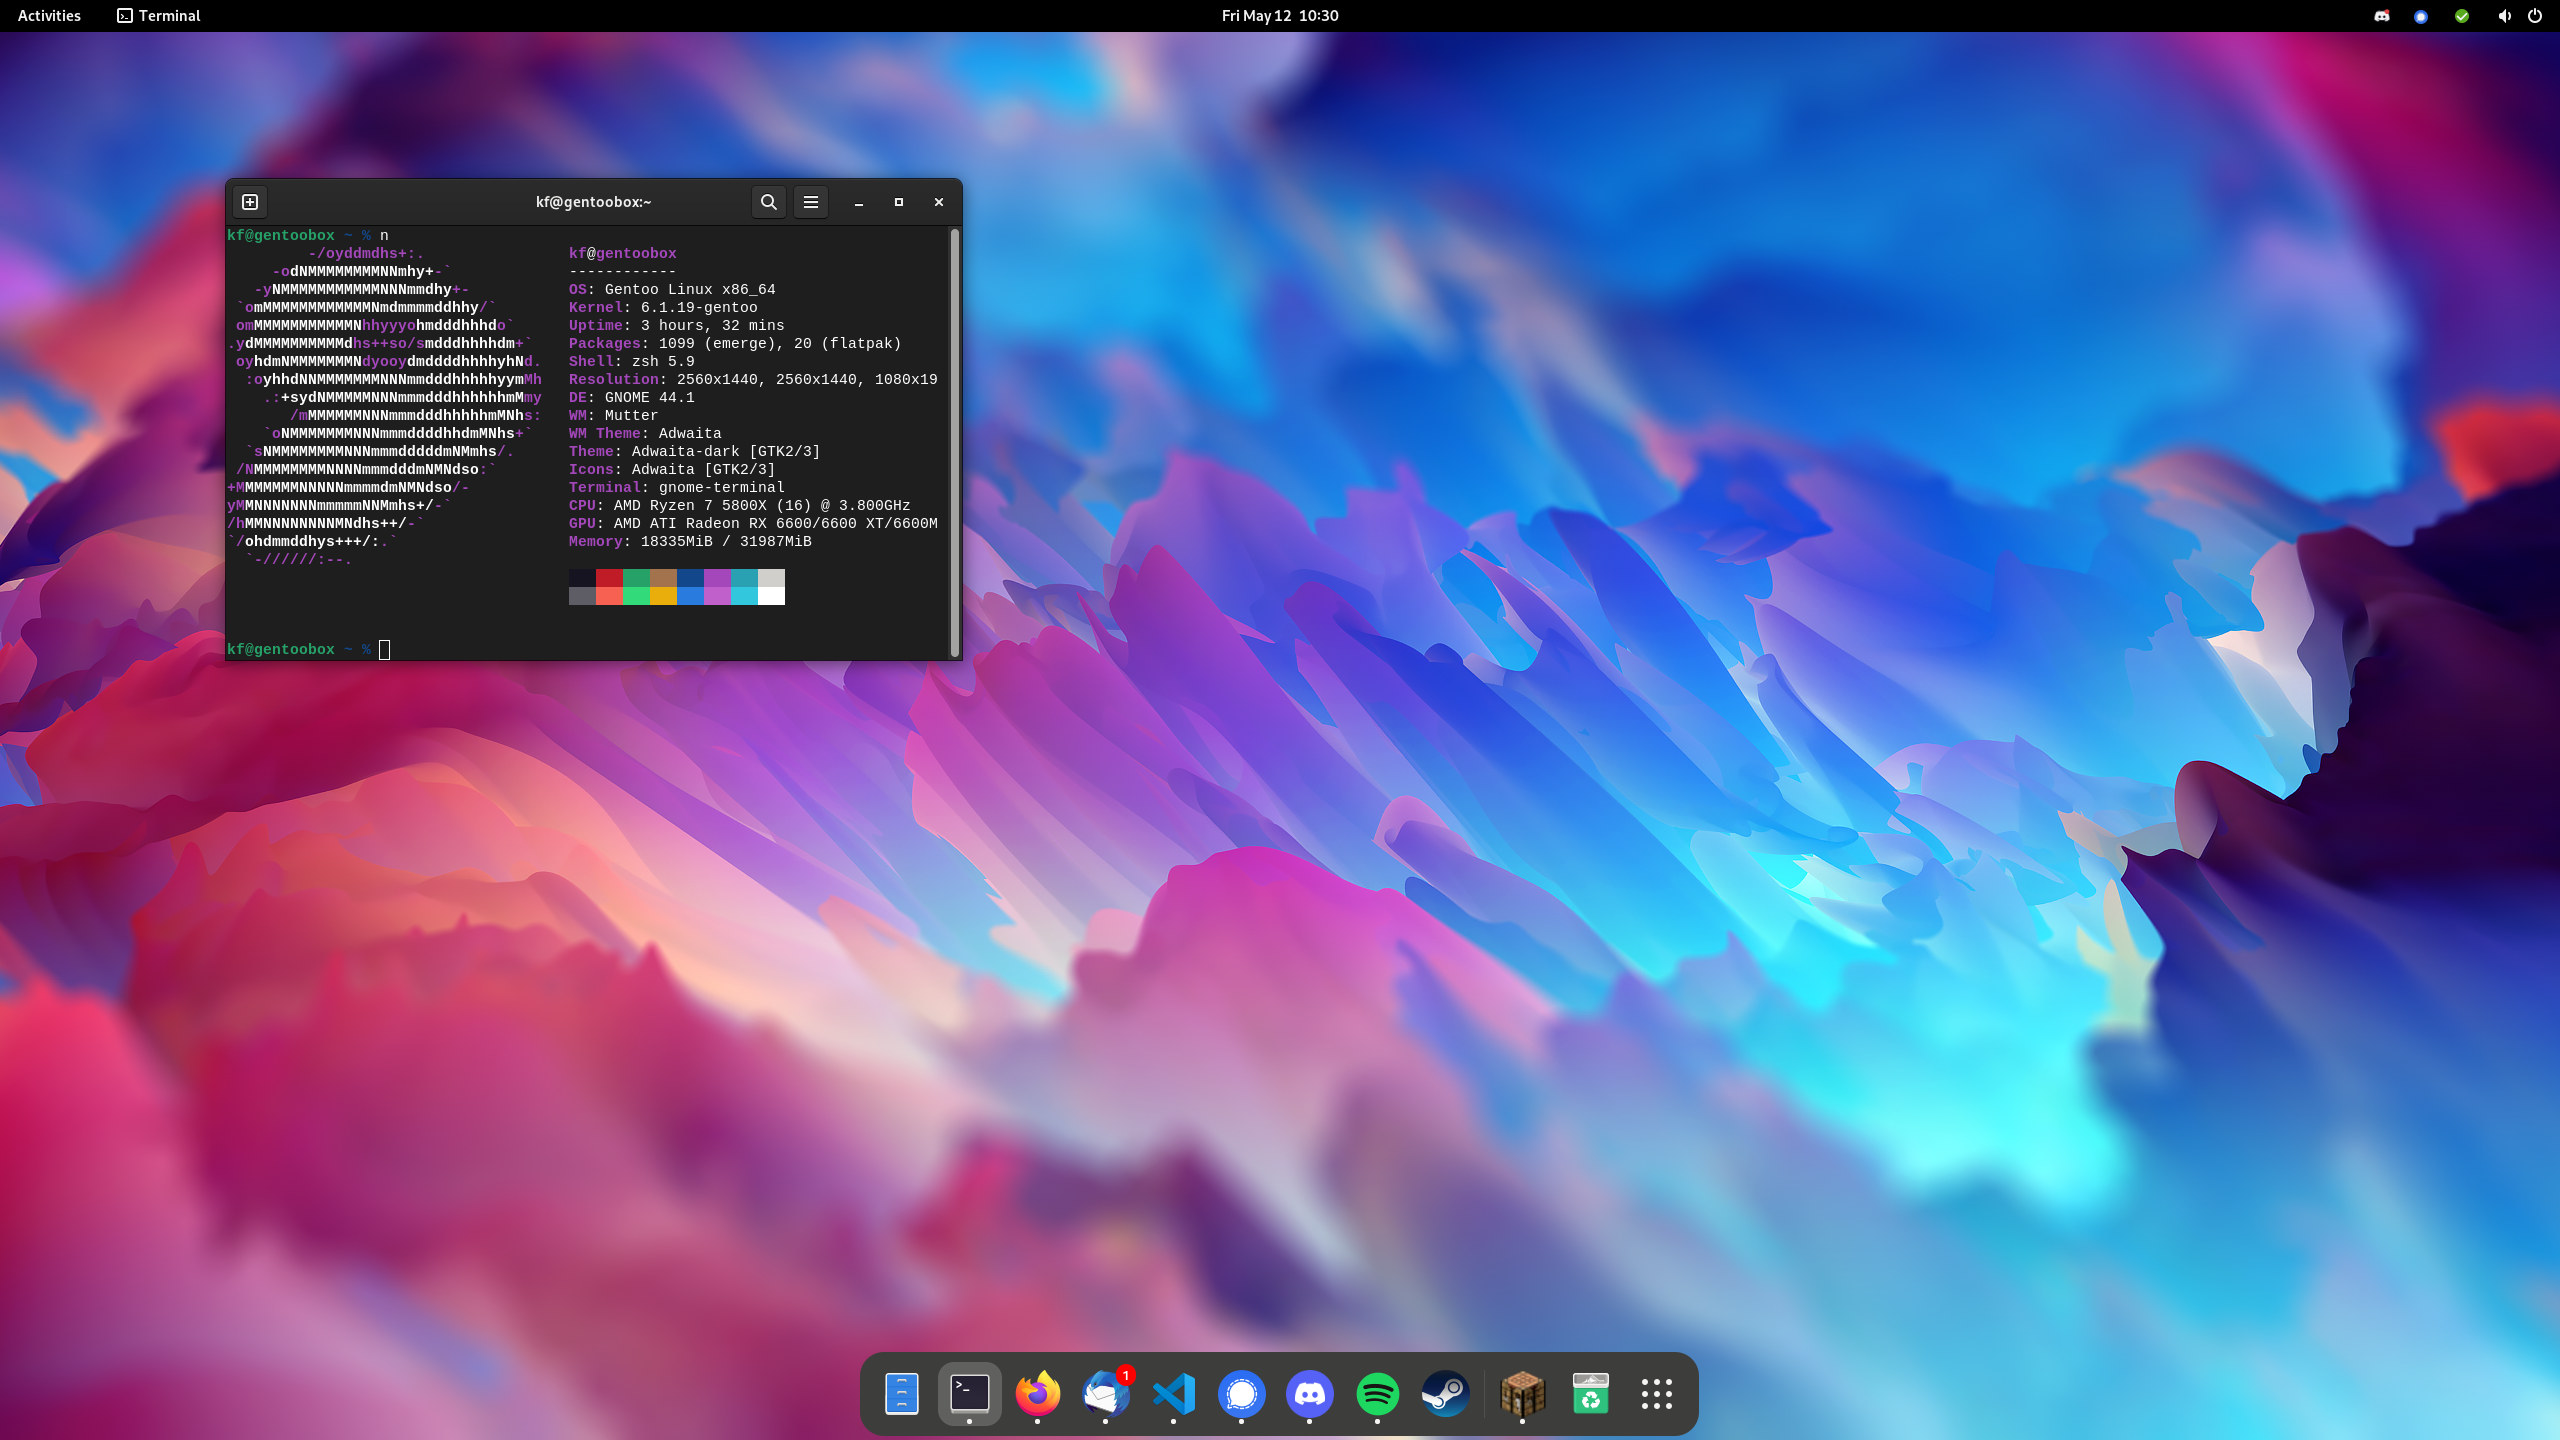 A screenshot of my current Gnome desktop showing a terminal window running neofetch with Gentoo Linux info